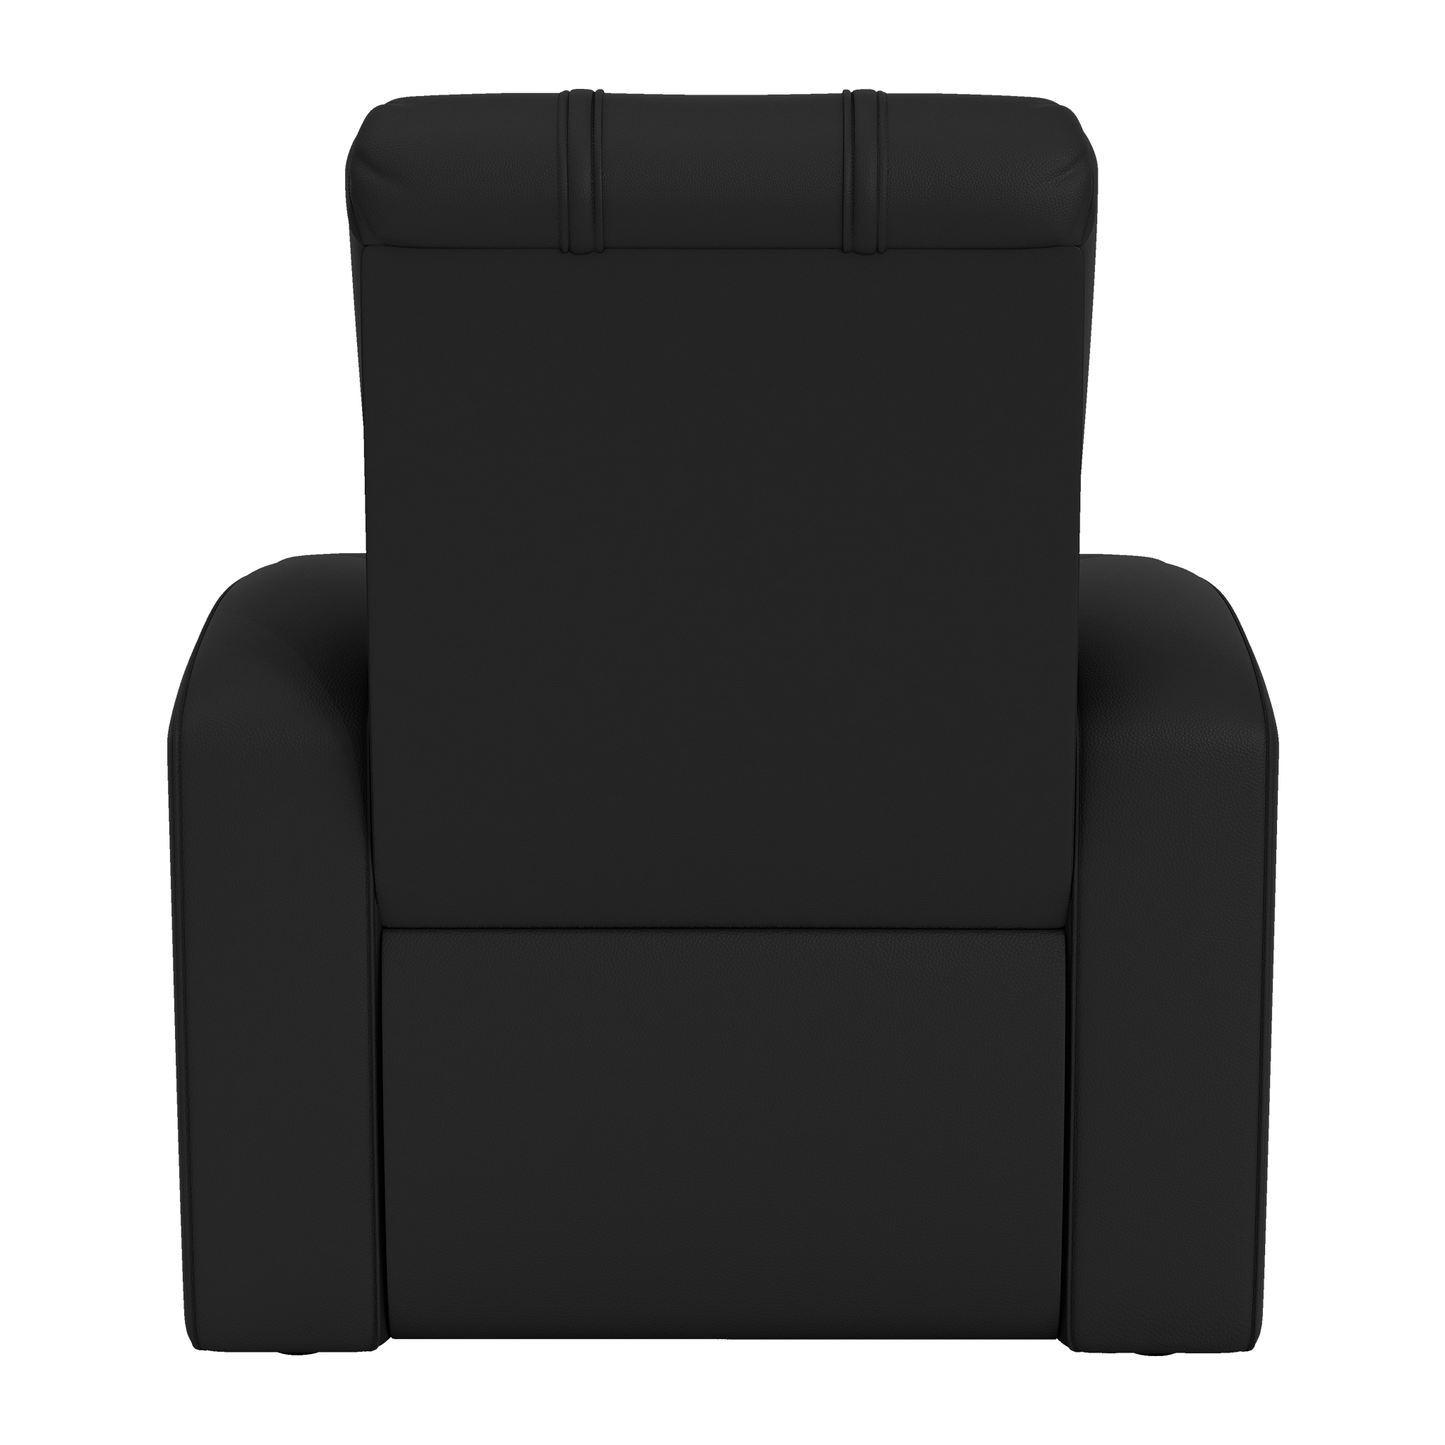 Relax Home Theater Recliner with Charlotte FC Monogram Logo